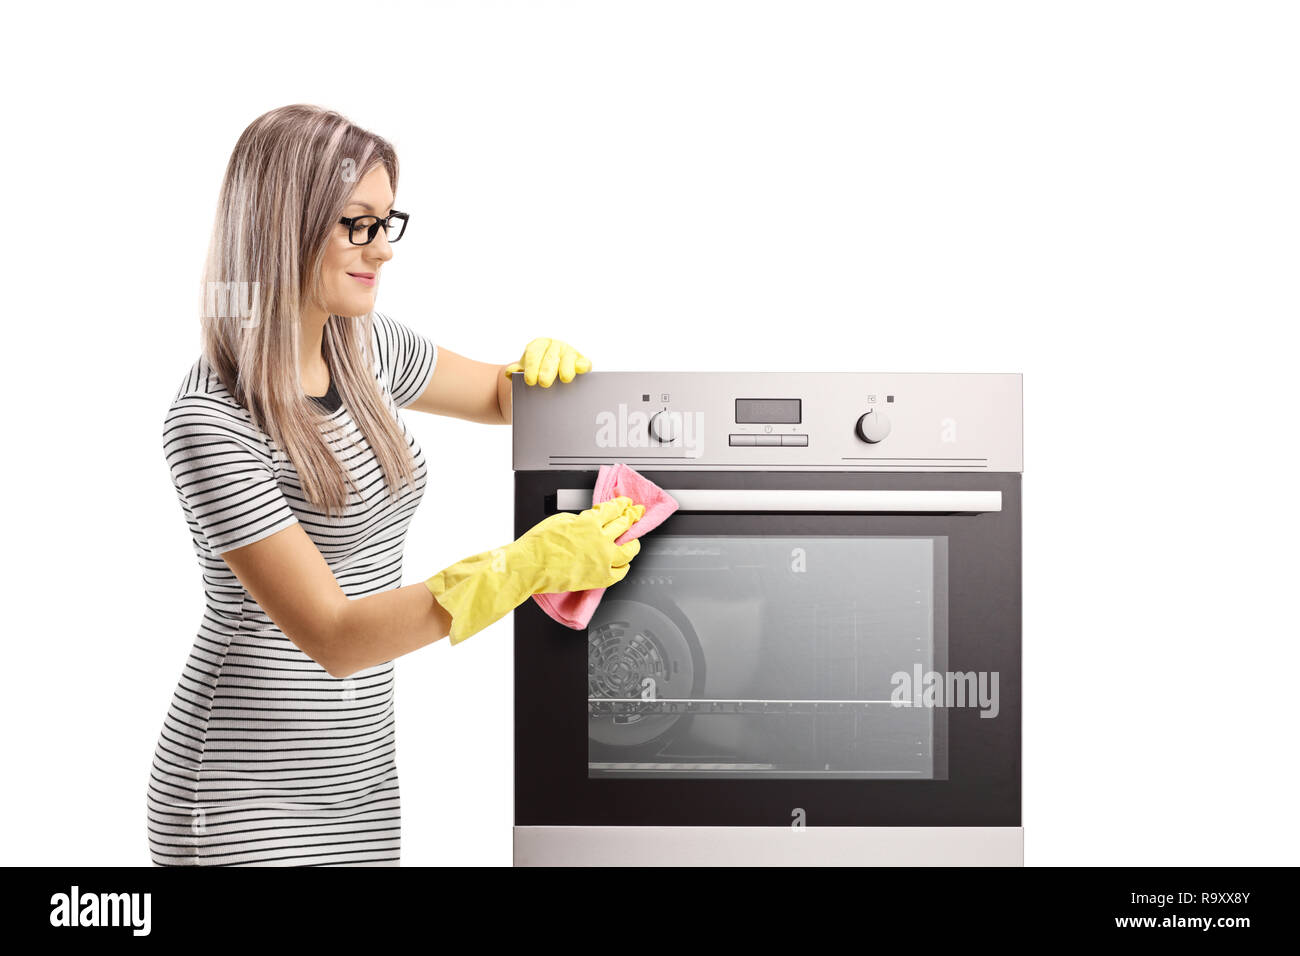 5,178 Microwave Oven Cleaning Images, Stock Photos, 3D objects, & Vectors